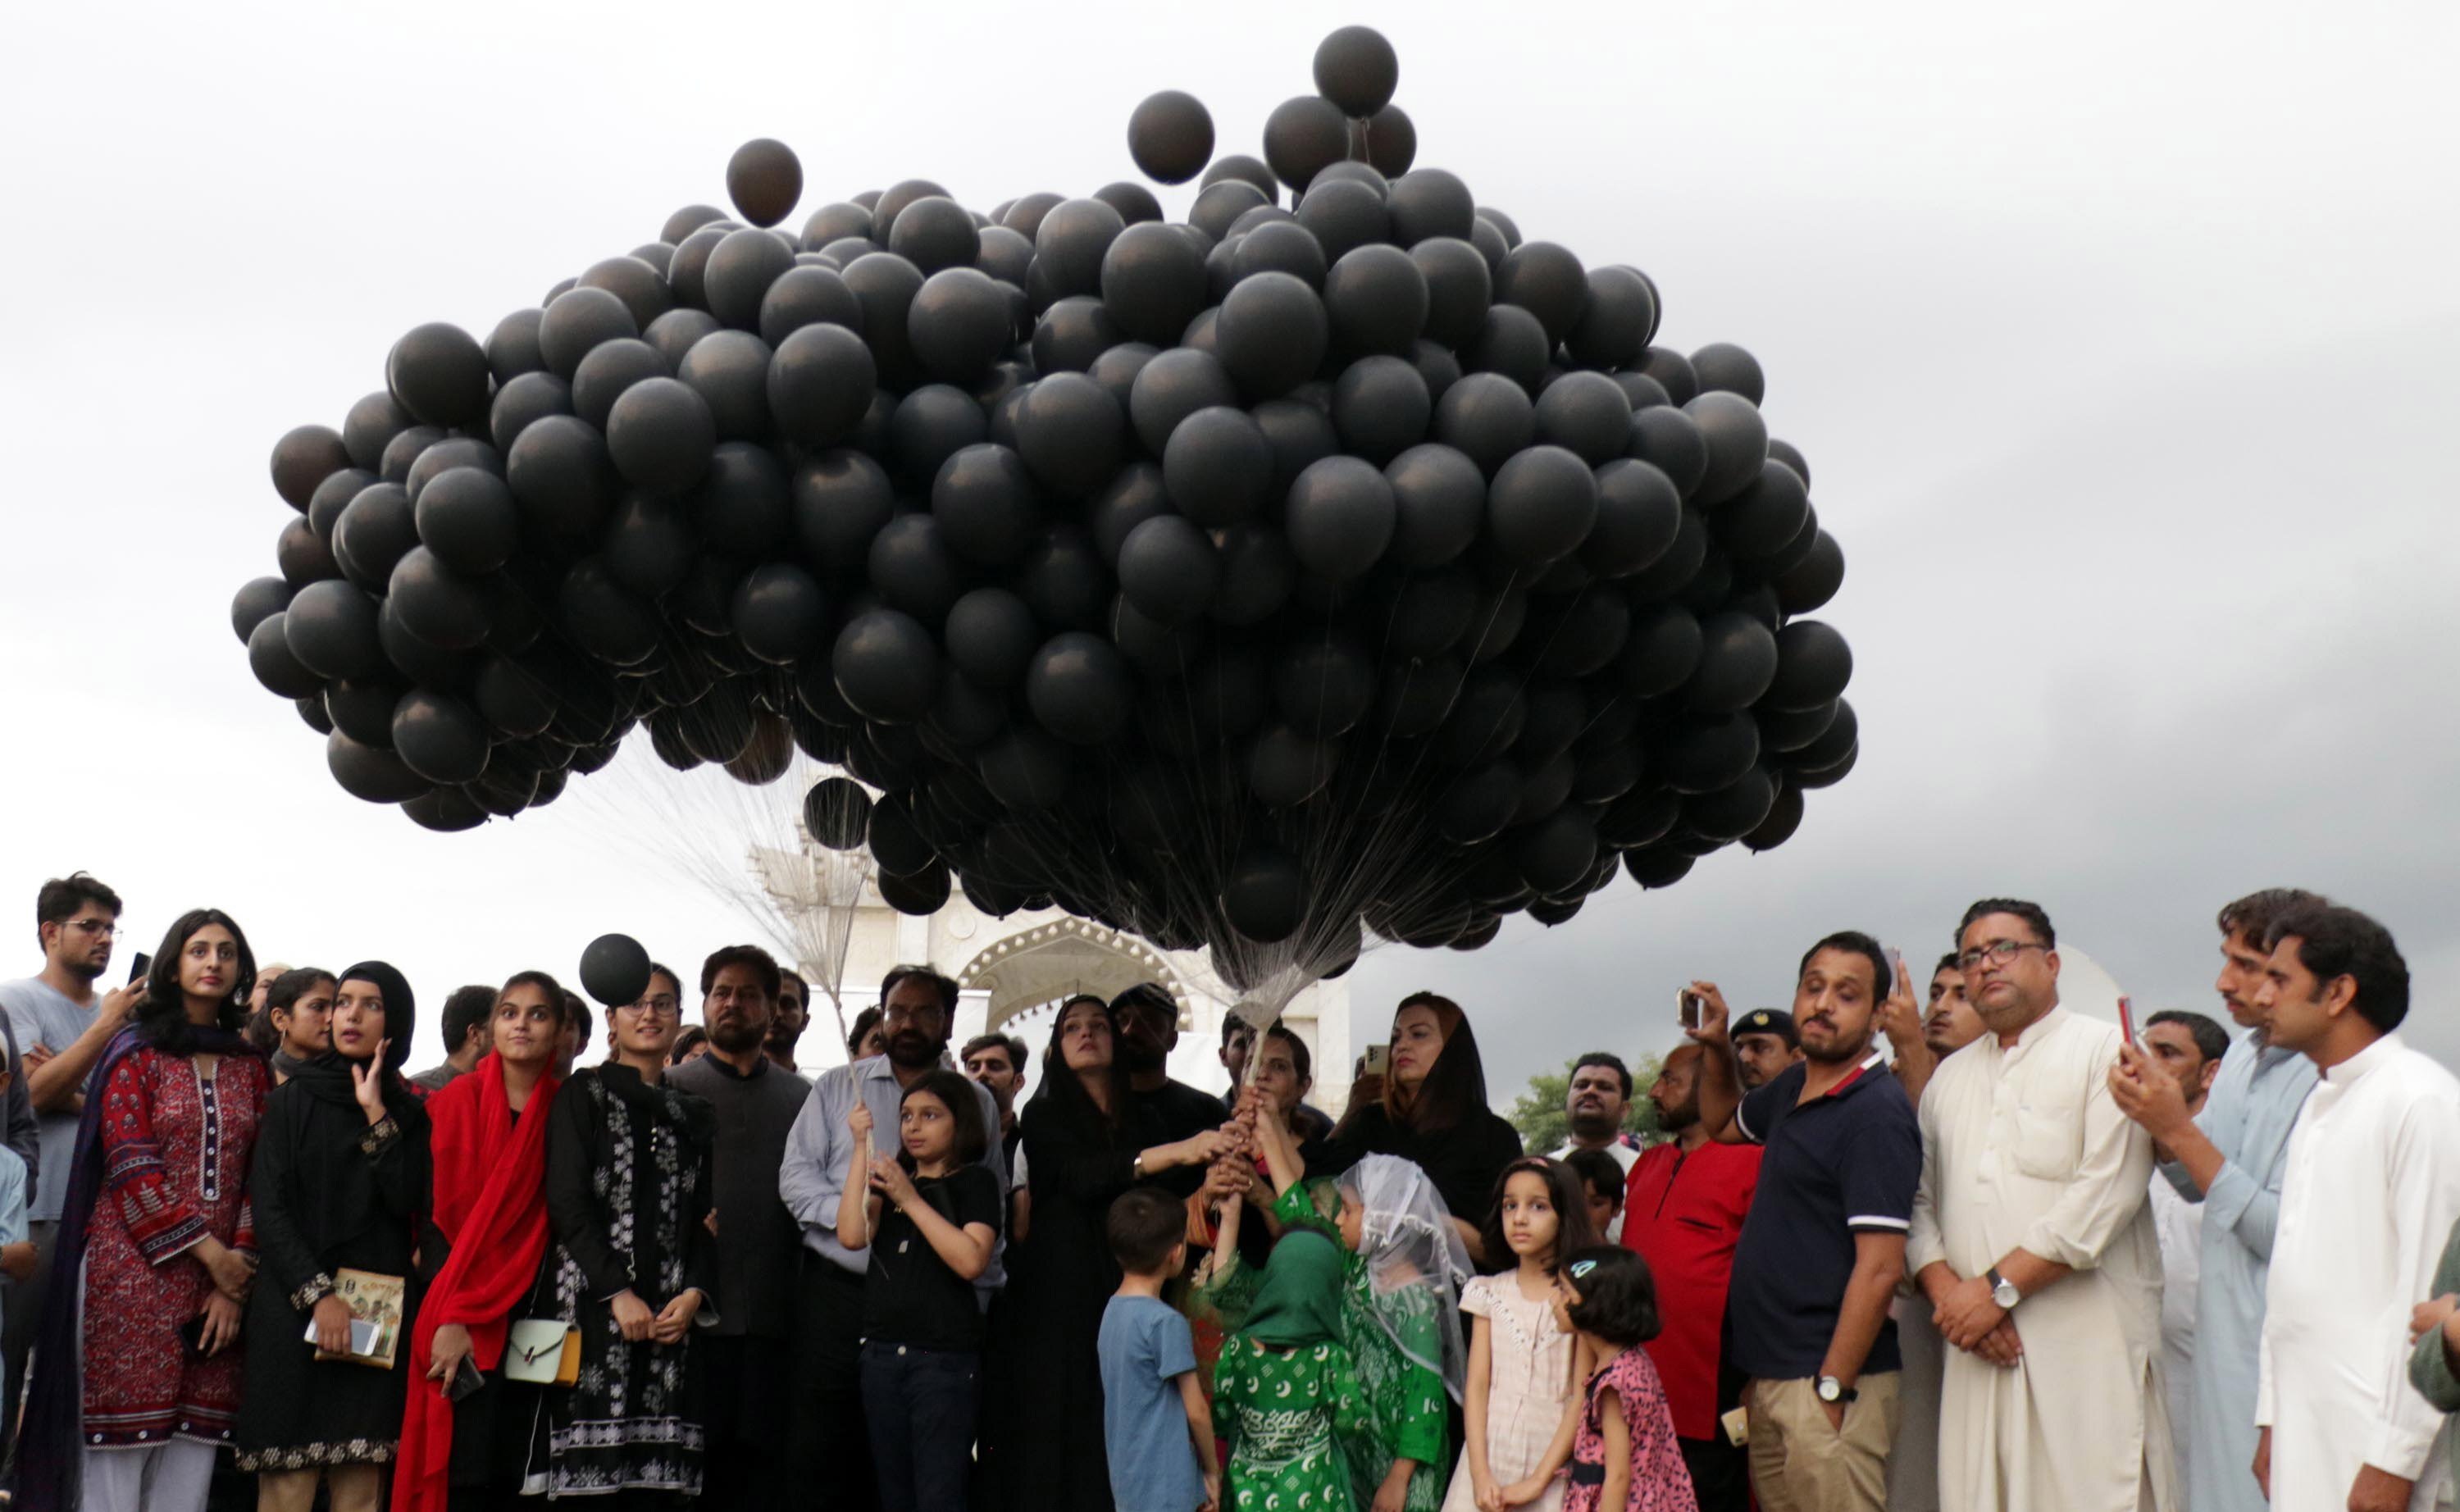 People release black balloons to protest against alleged Indian aggression in Indian-administered Kashmir on India’s Independence Day, in Islamabad, Pakistan, on August 15 last year. Pakistan and India have fought two of their three wars over Kashmir. Photo: EPA-EFE